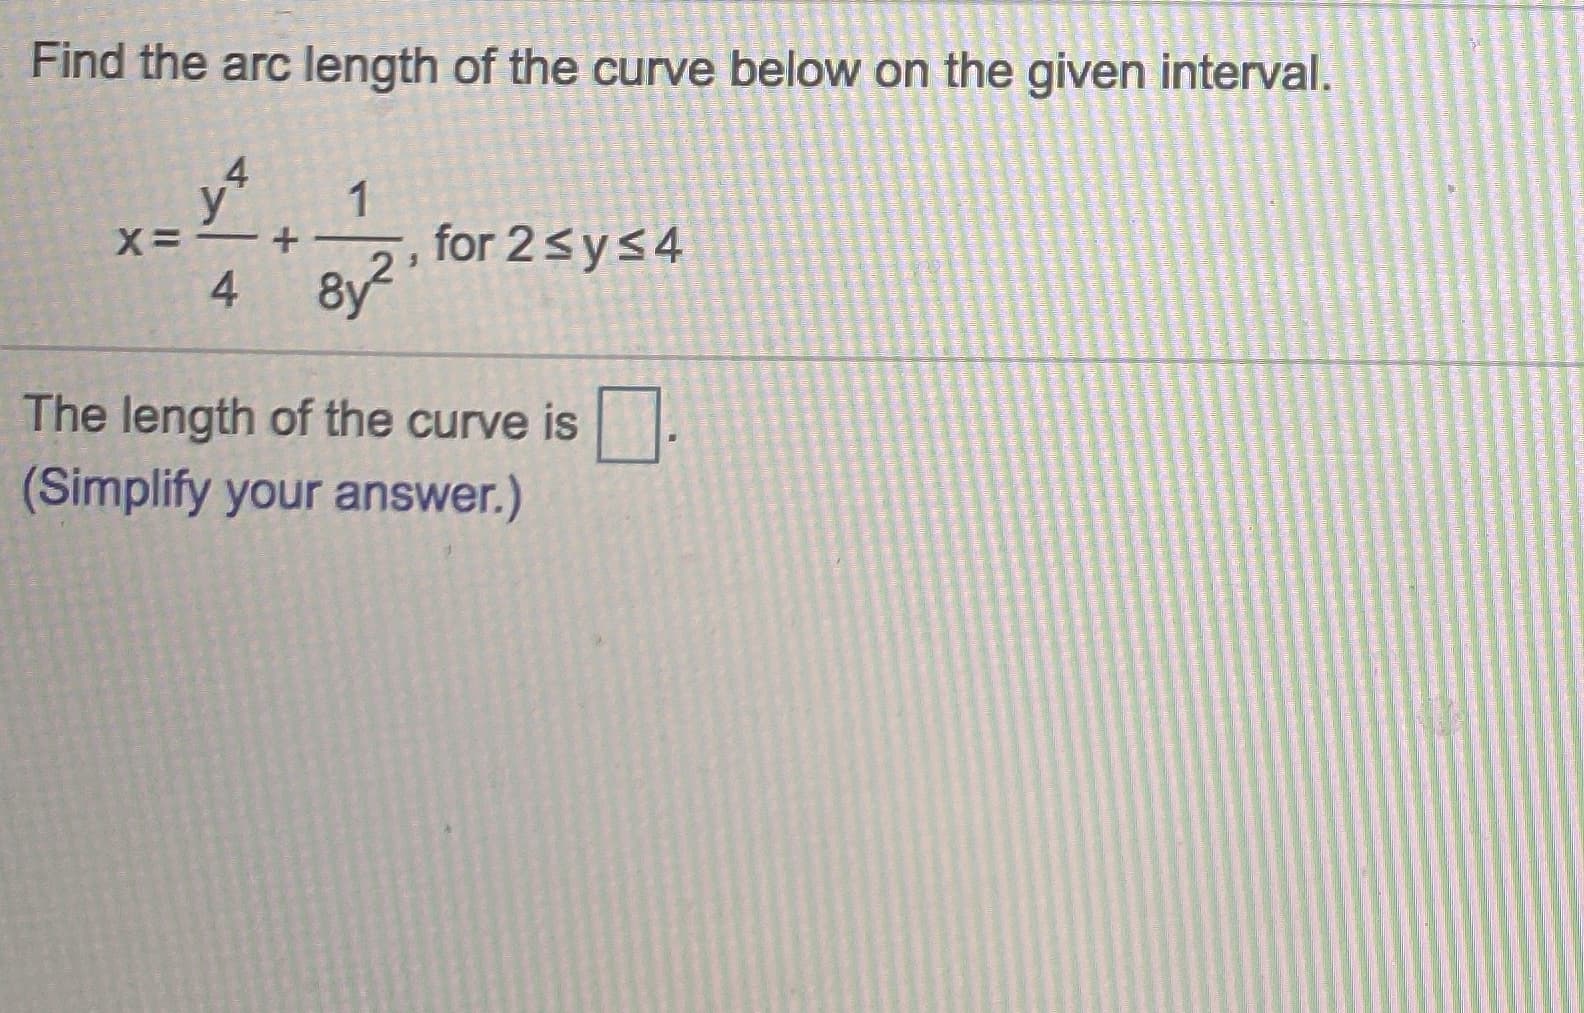 Find the arc length of the curve below on the given interval.
とマ
1
X=-
, for 2sys4
8y
4
The length of the curve is .
